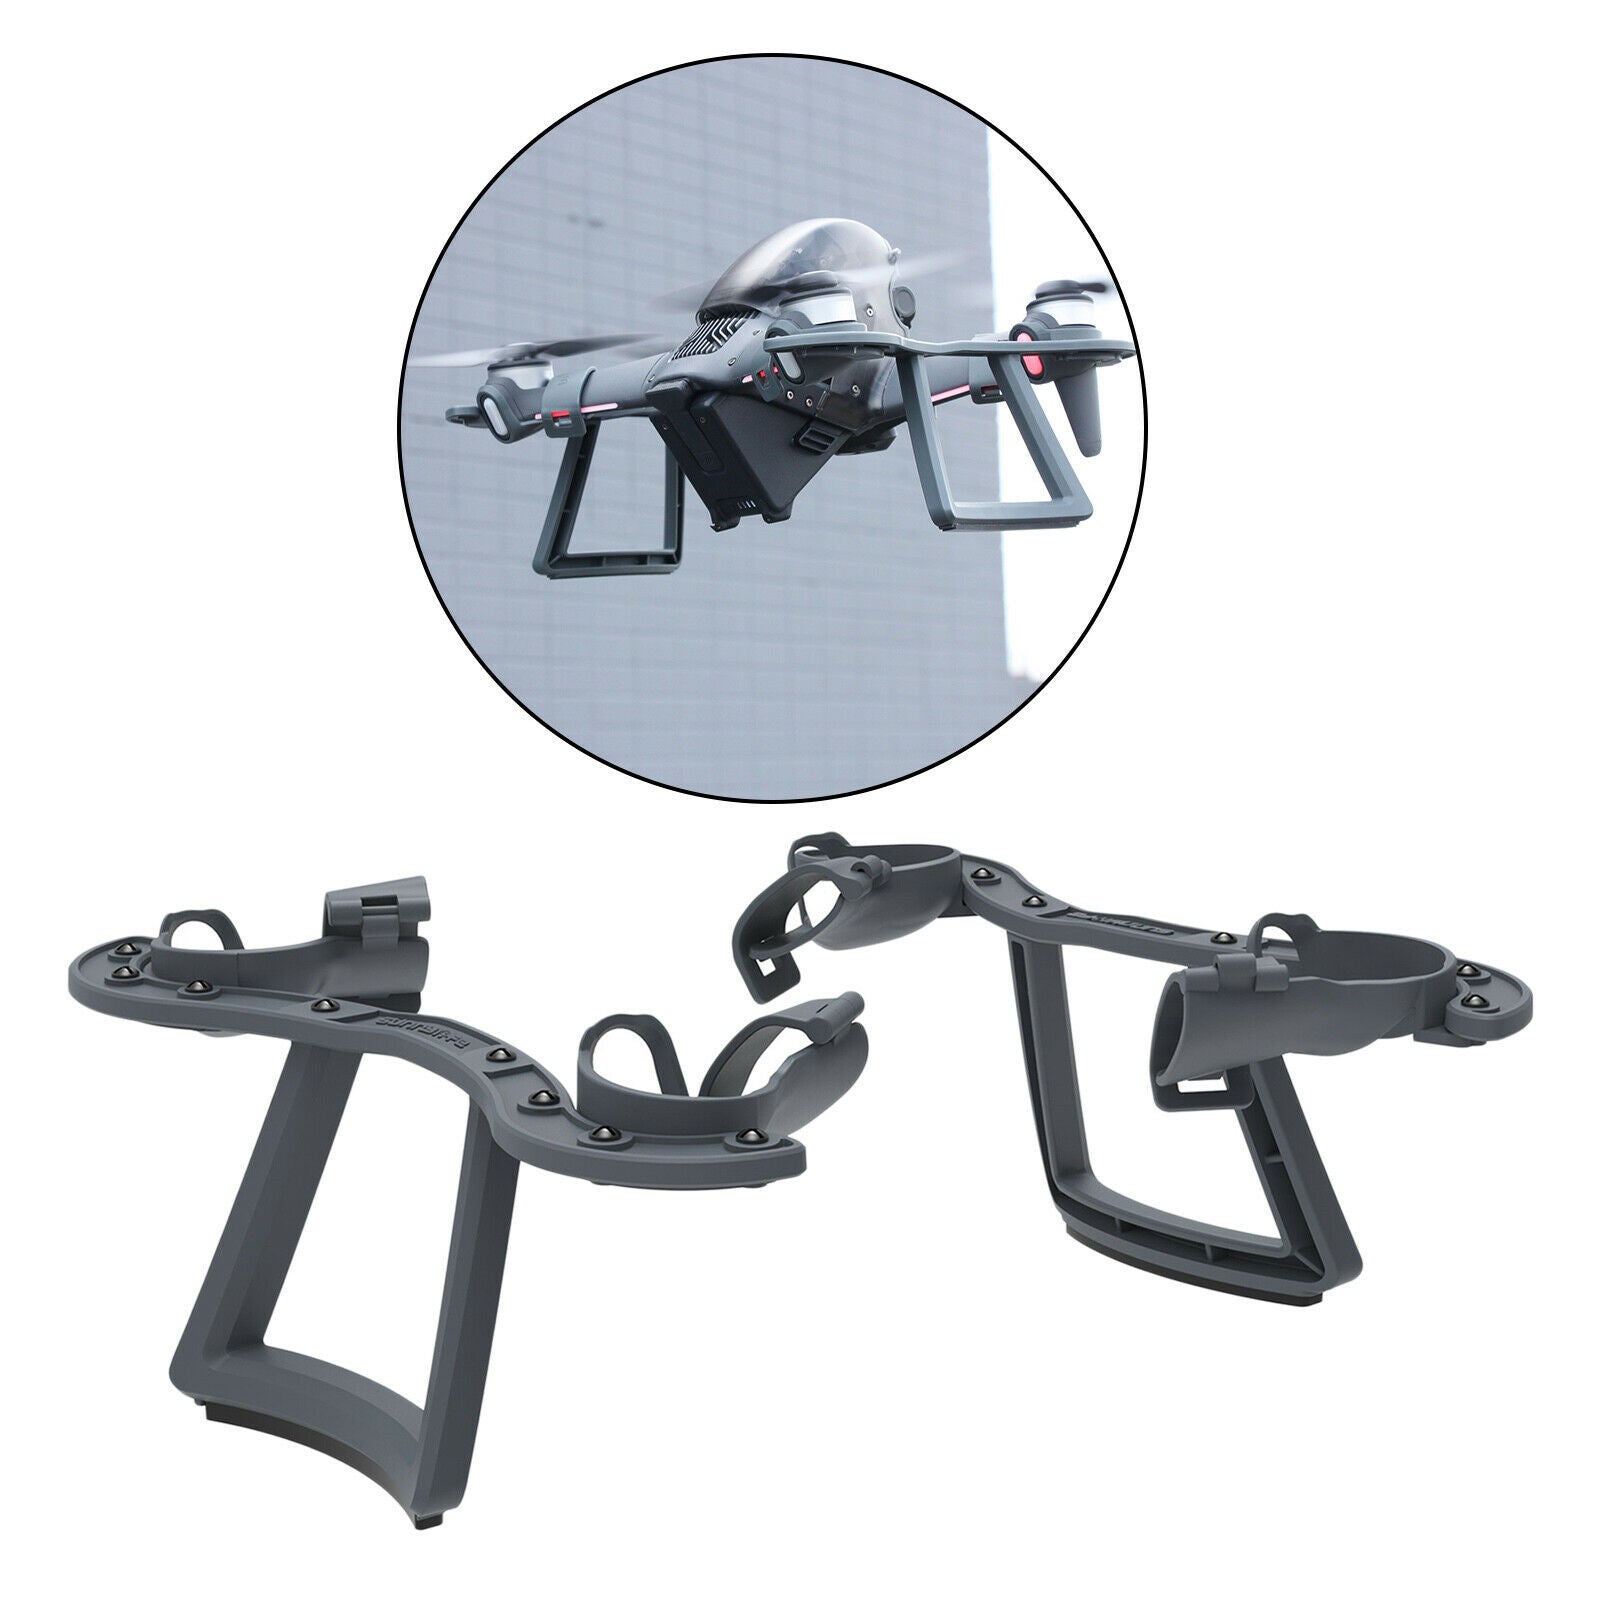 1 Pair Heightening Tripod for DJI FPV Racing Drone Accessories Durable